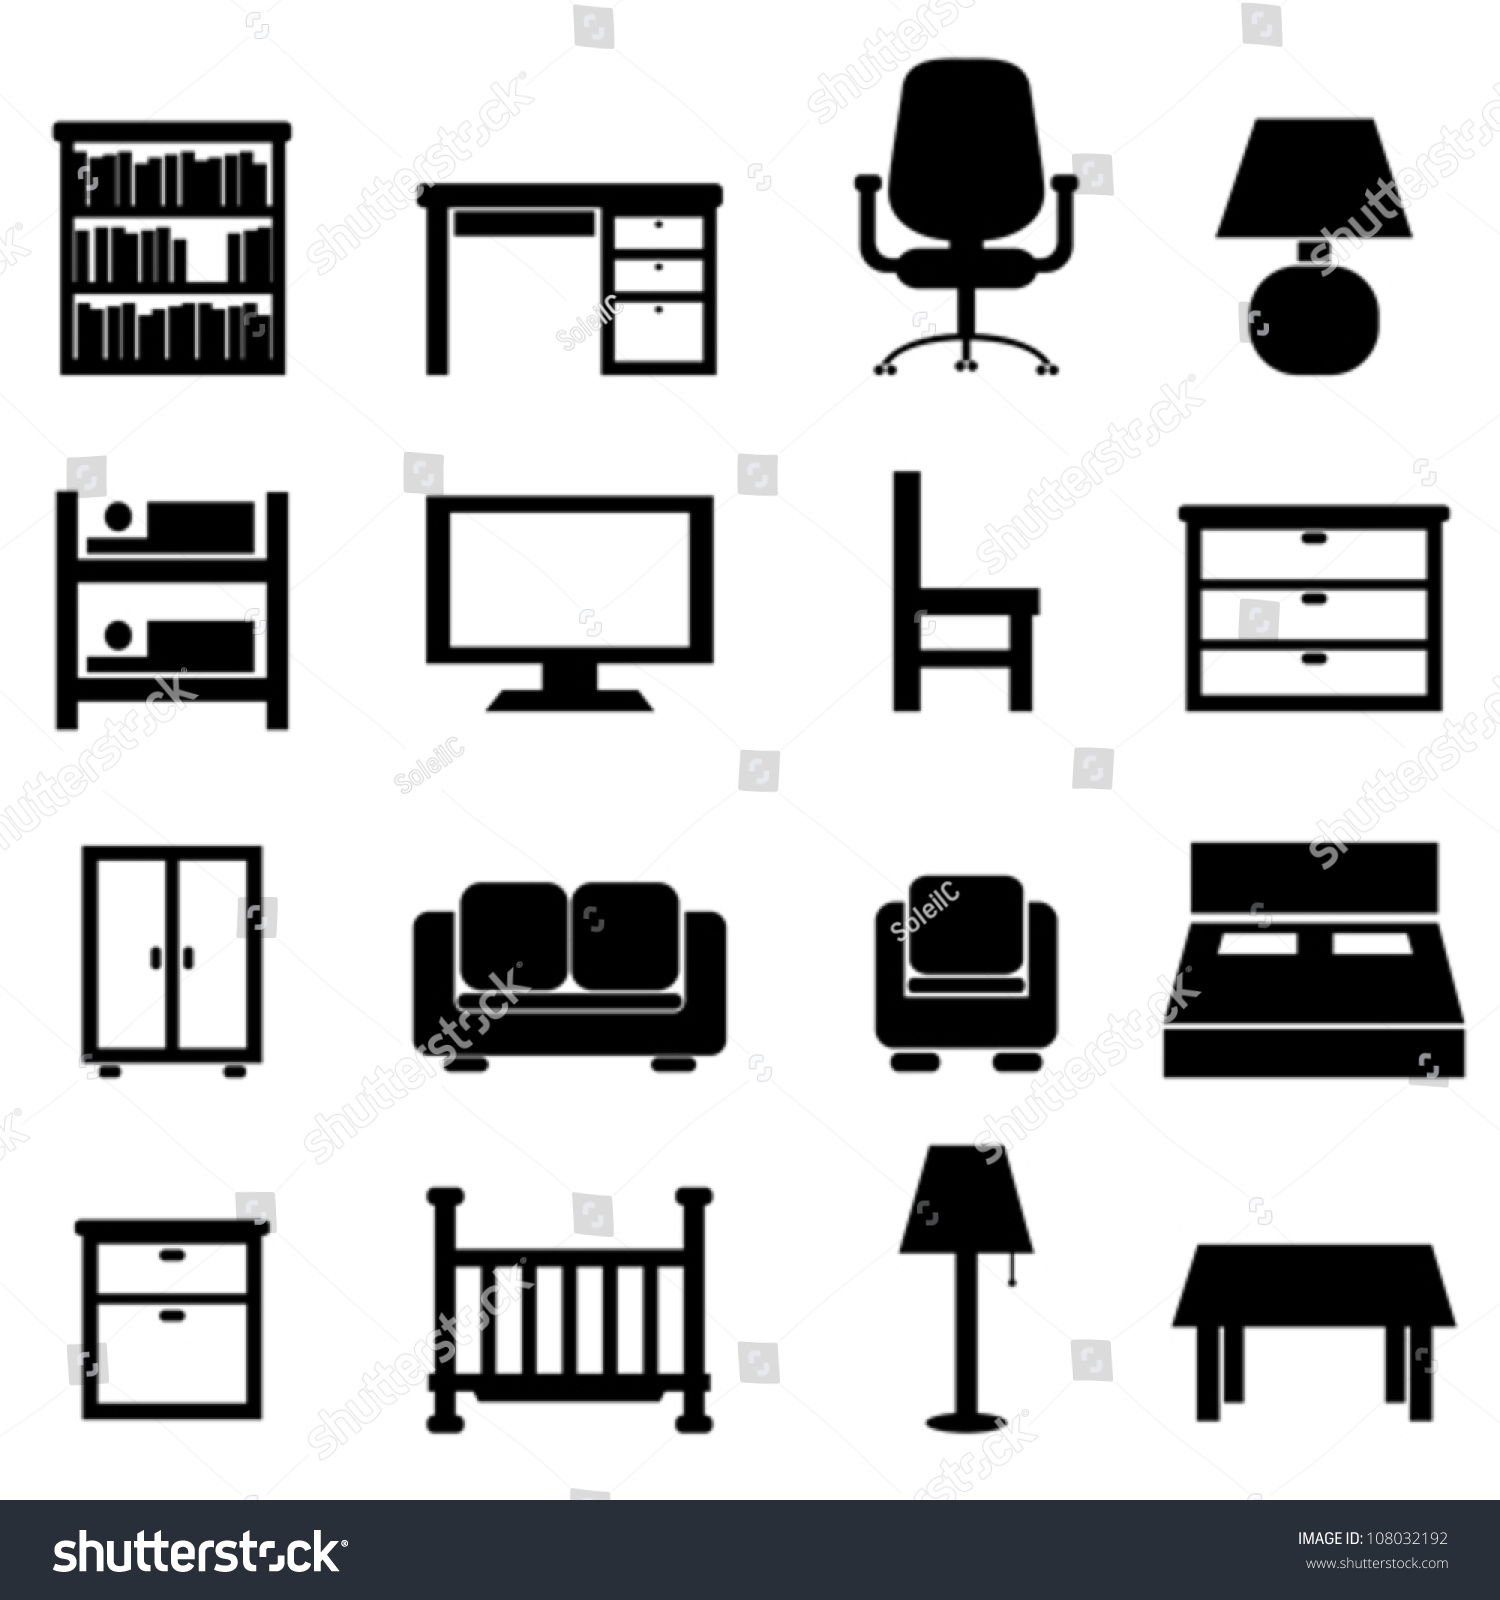 office clipart icon - photo #35